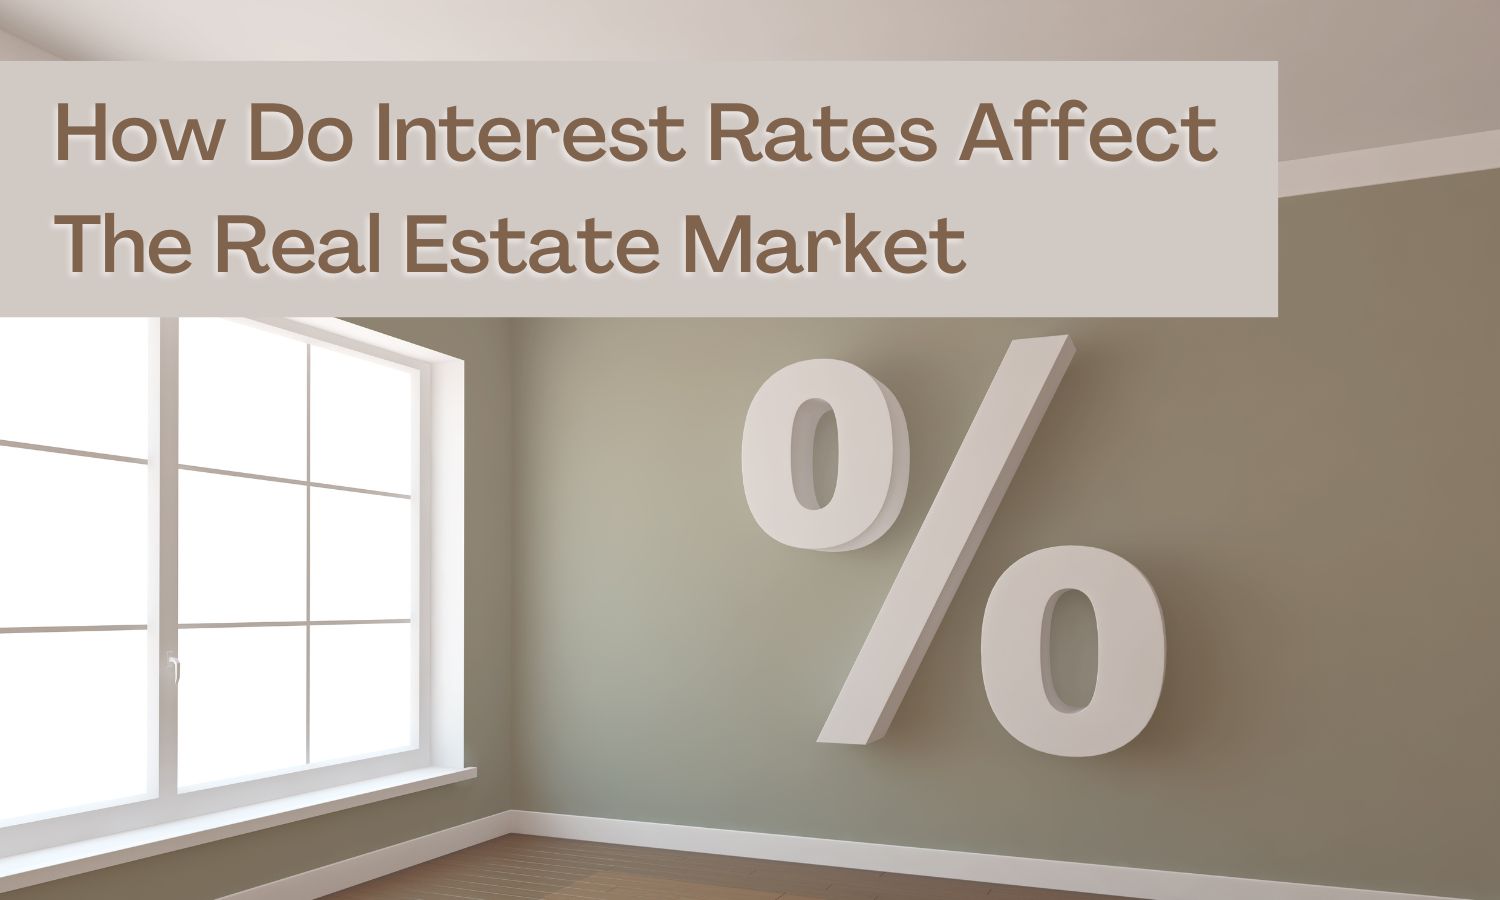 How Do Interest Rates Affect The Real Estate Market